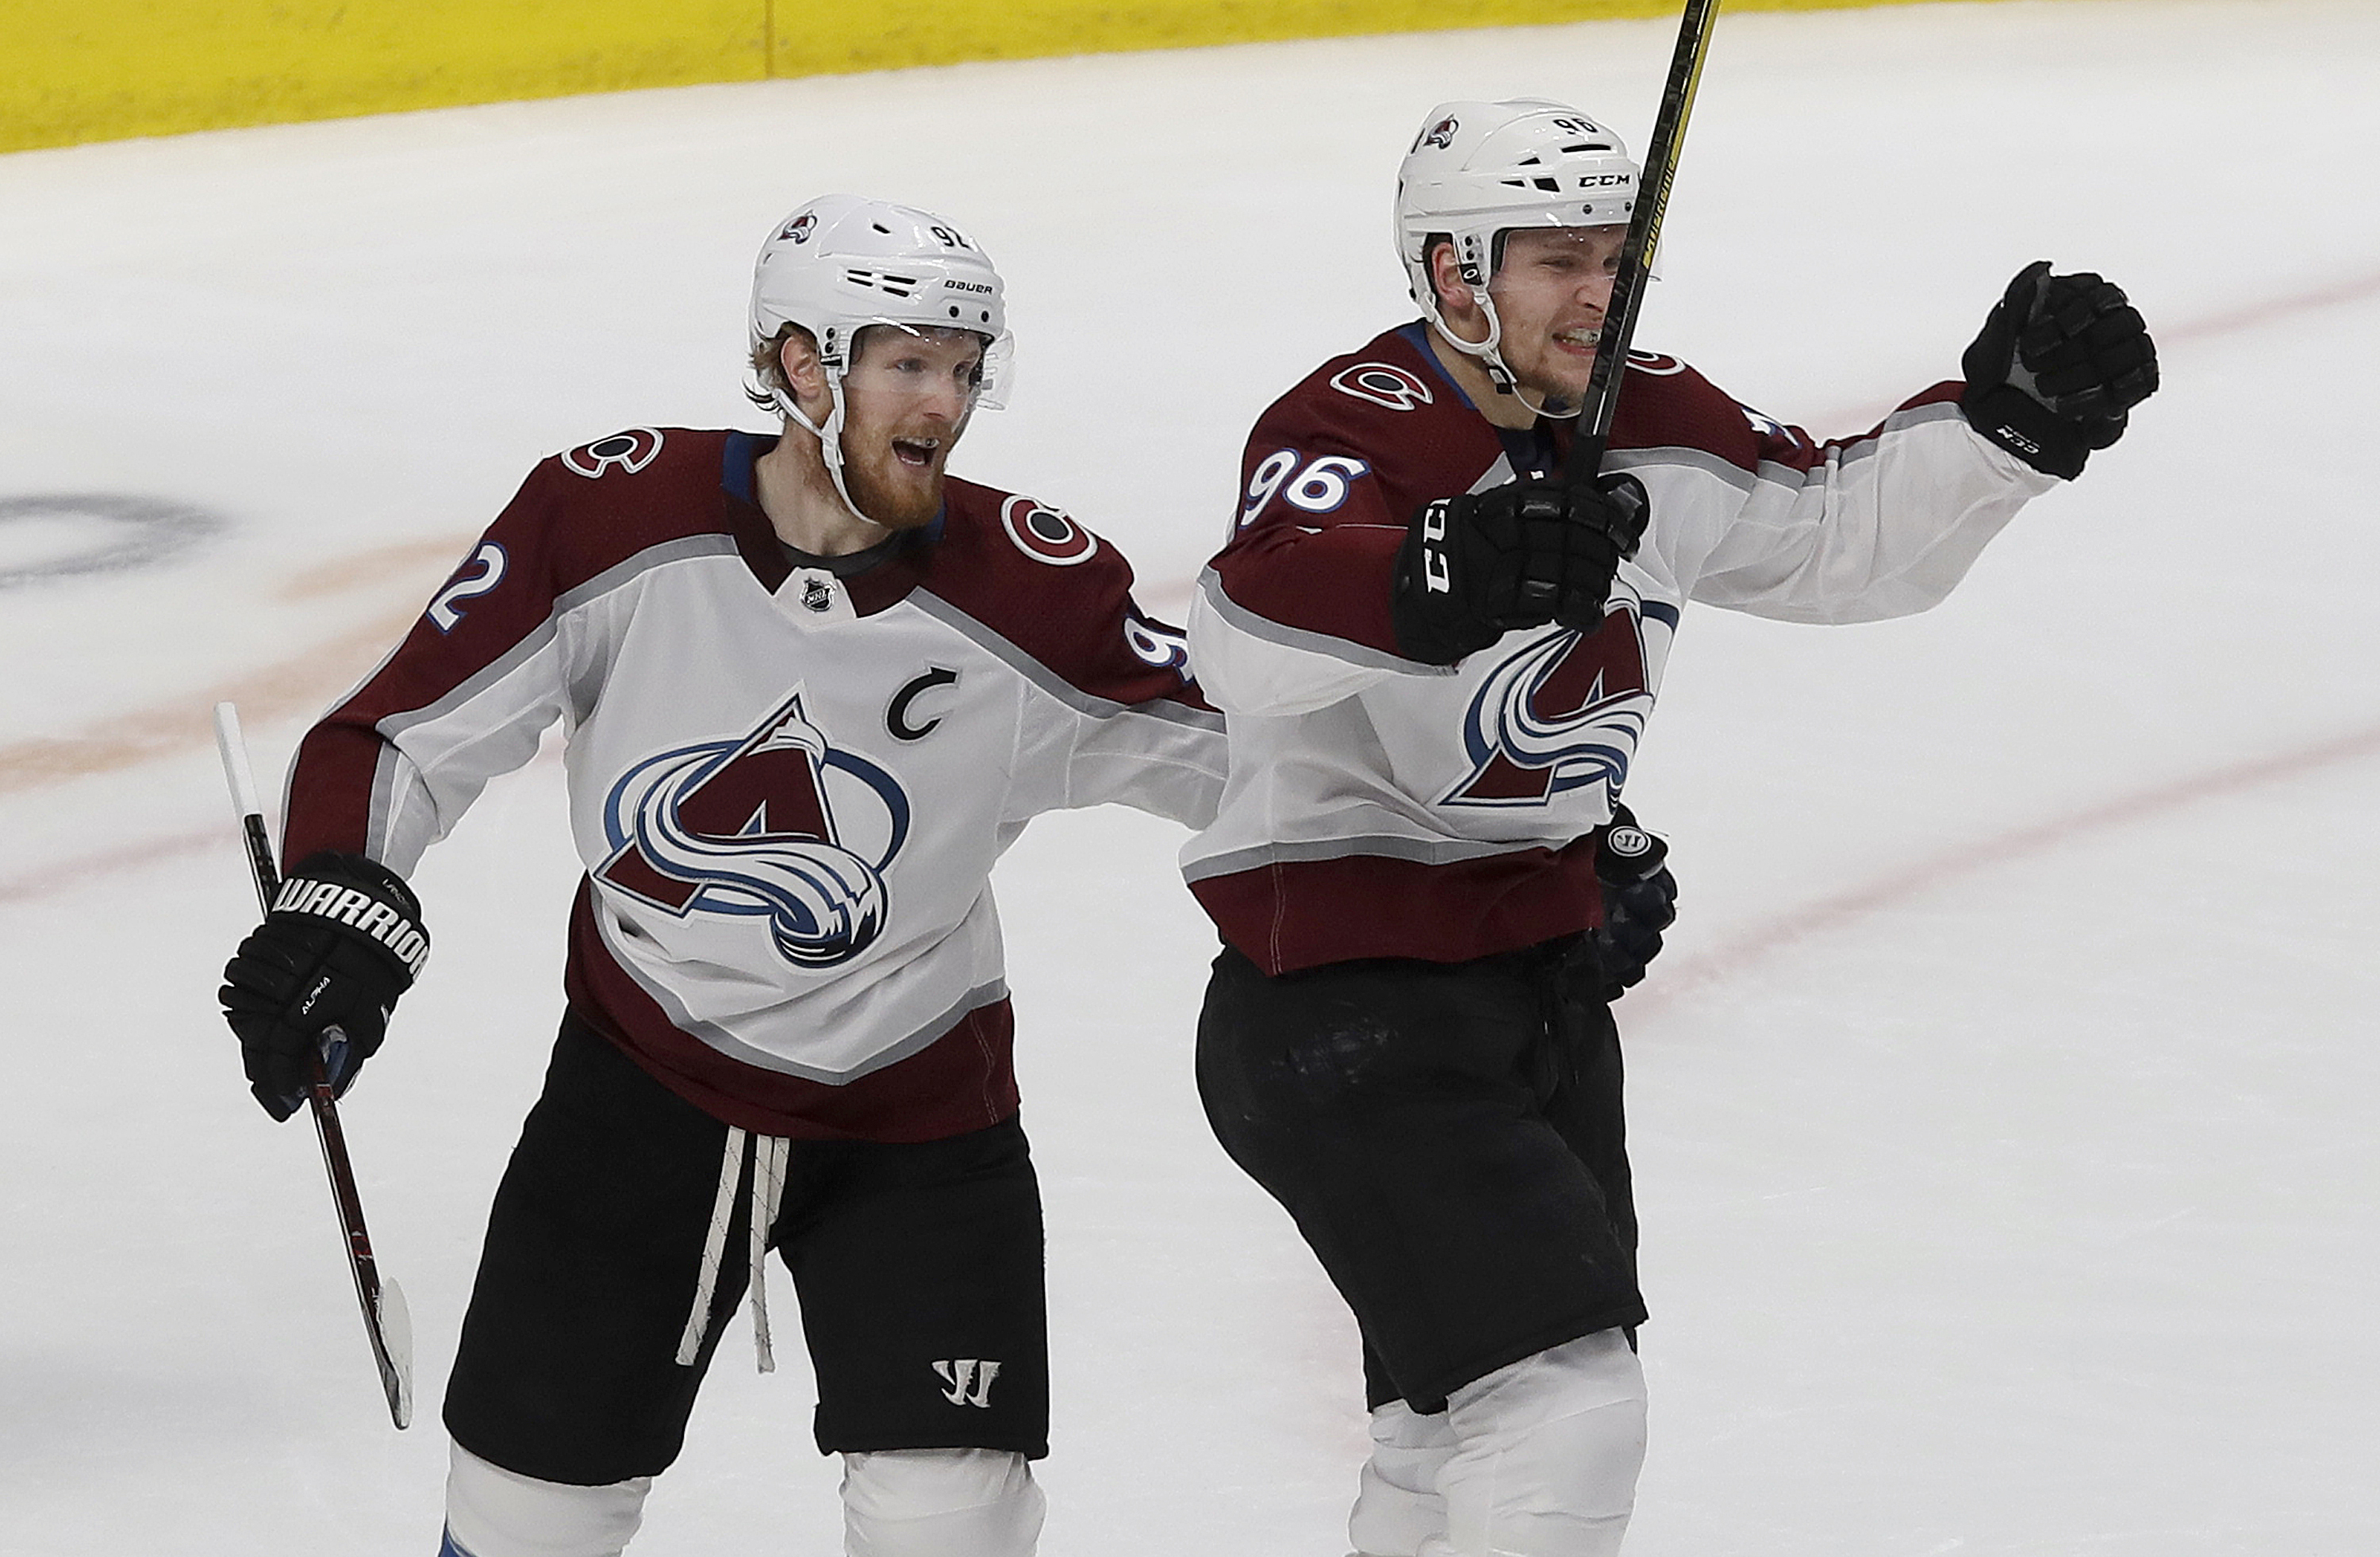 Youthful, speedy Avalanche take another big step forward